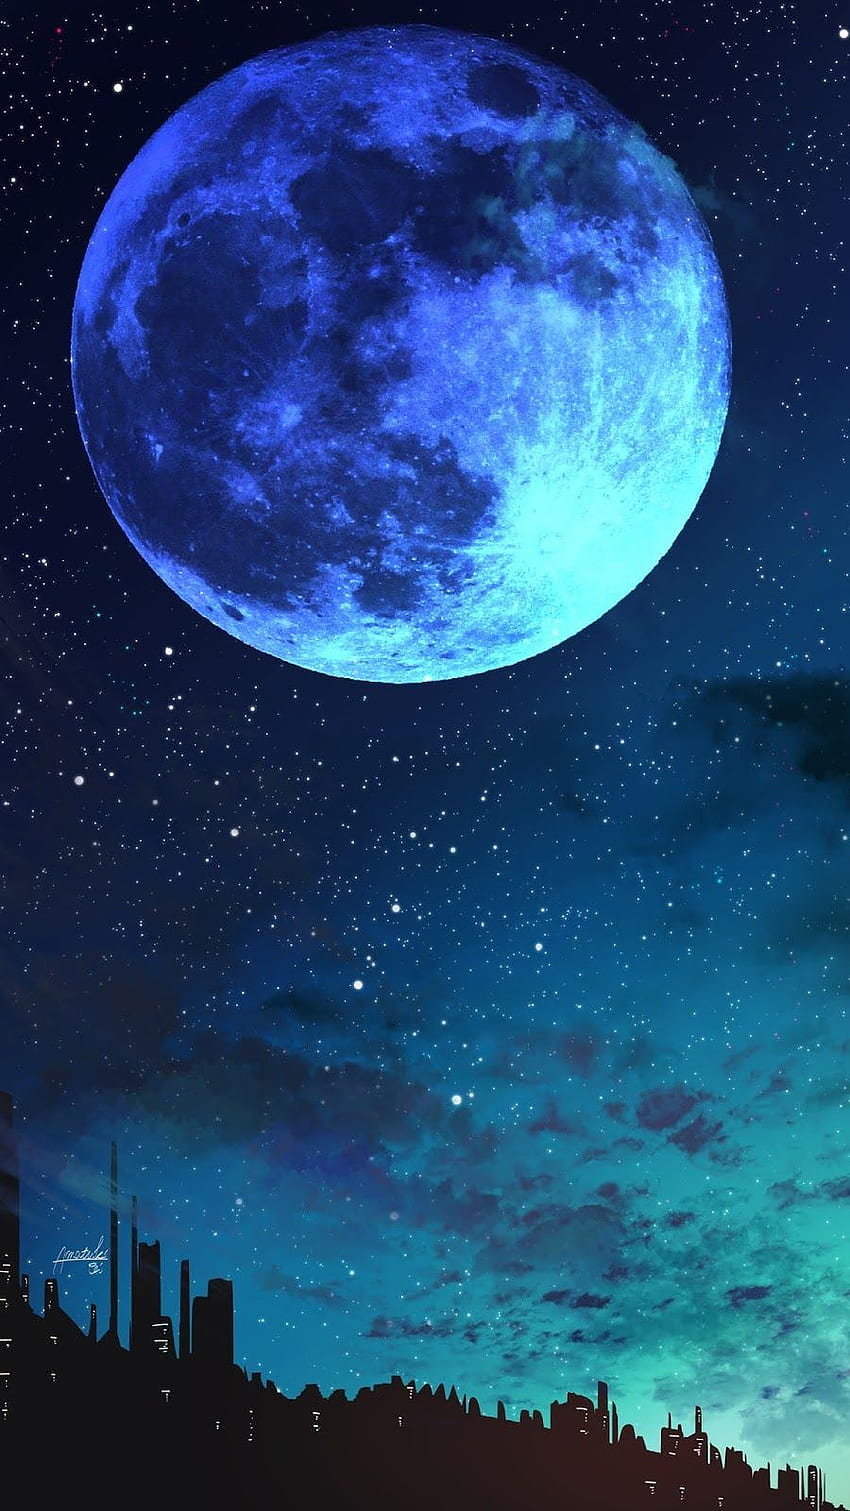 Moon Rise IPhone Wallpaper HD  IPhone Wallpapers  iPhone Wallpapers